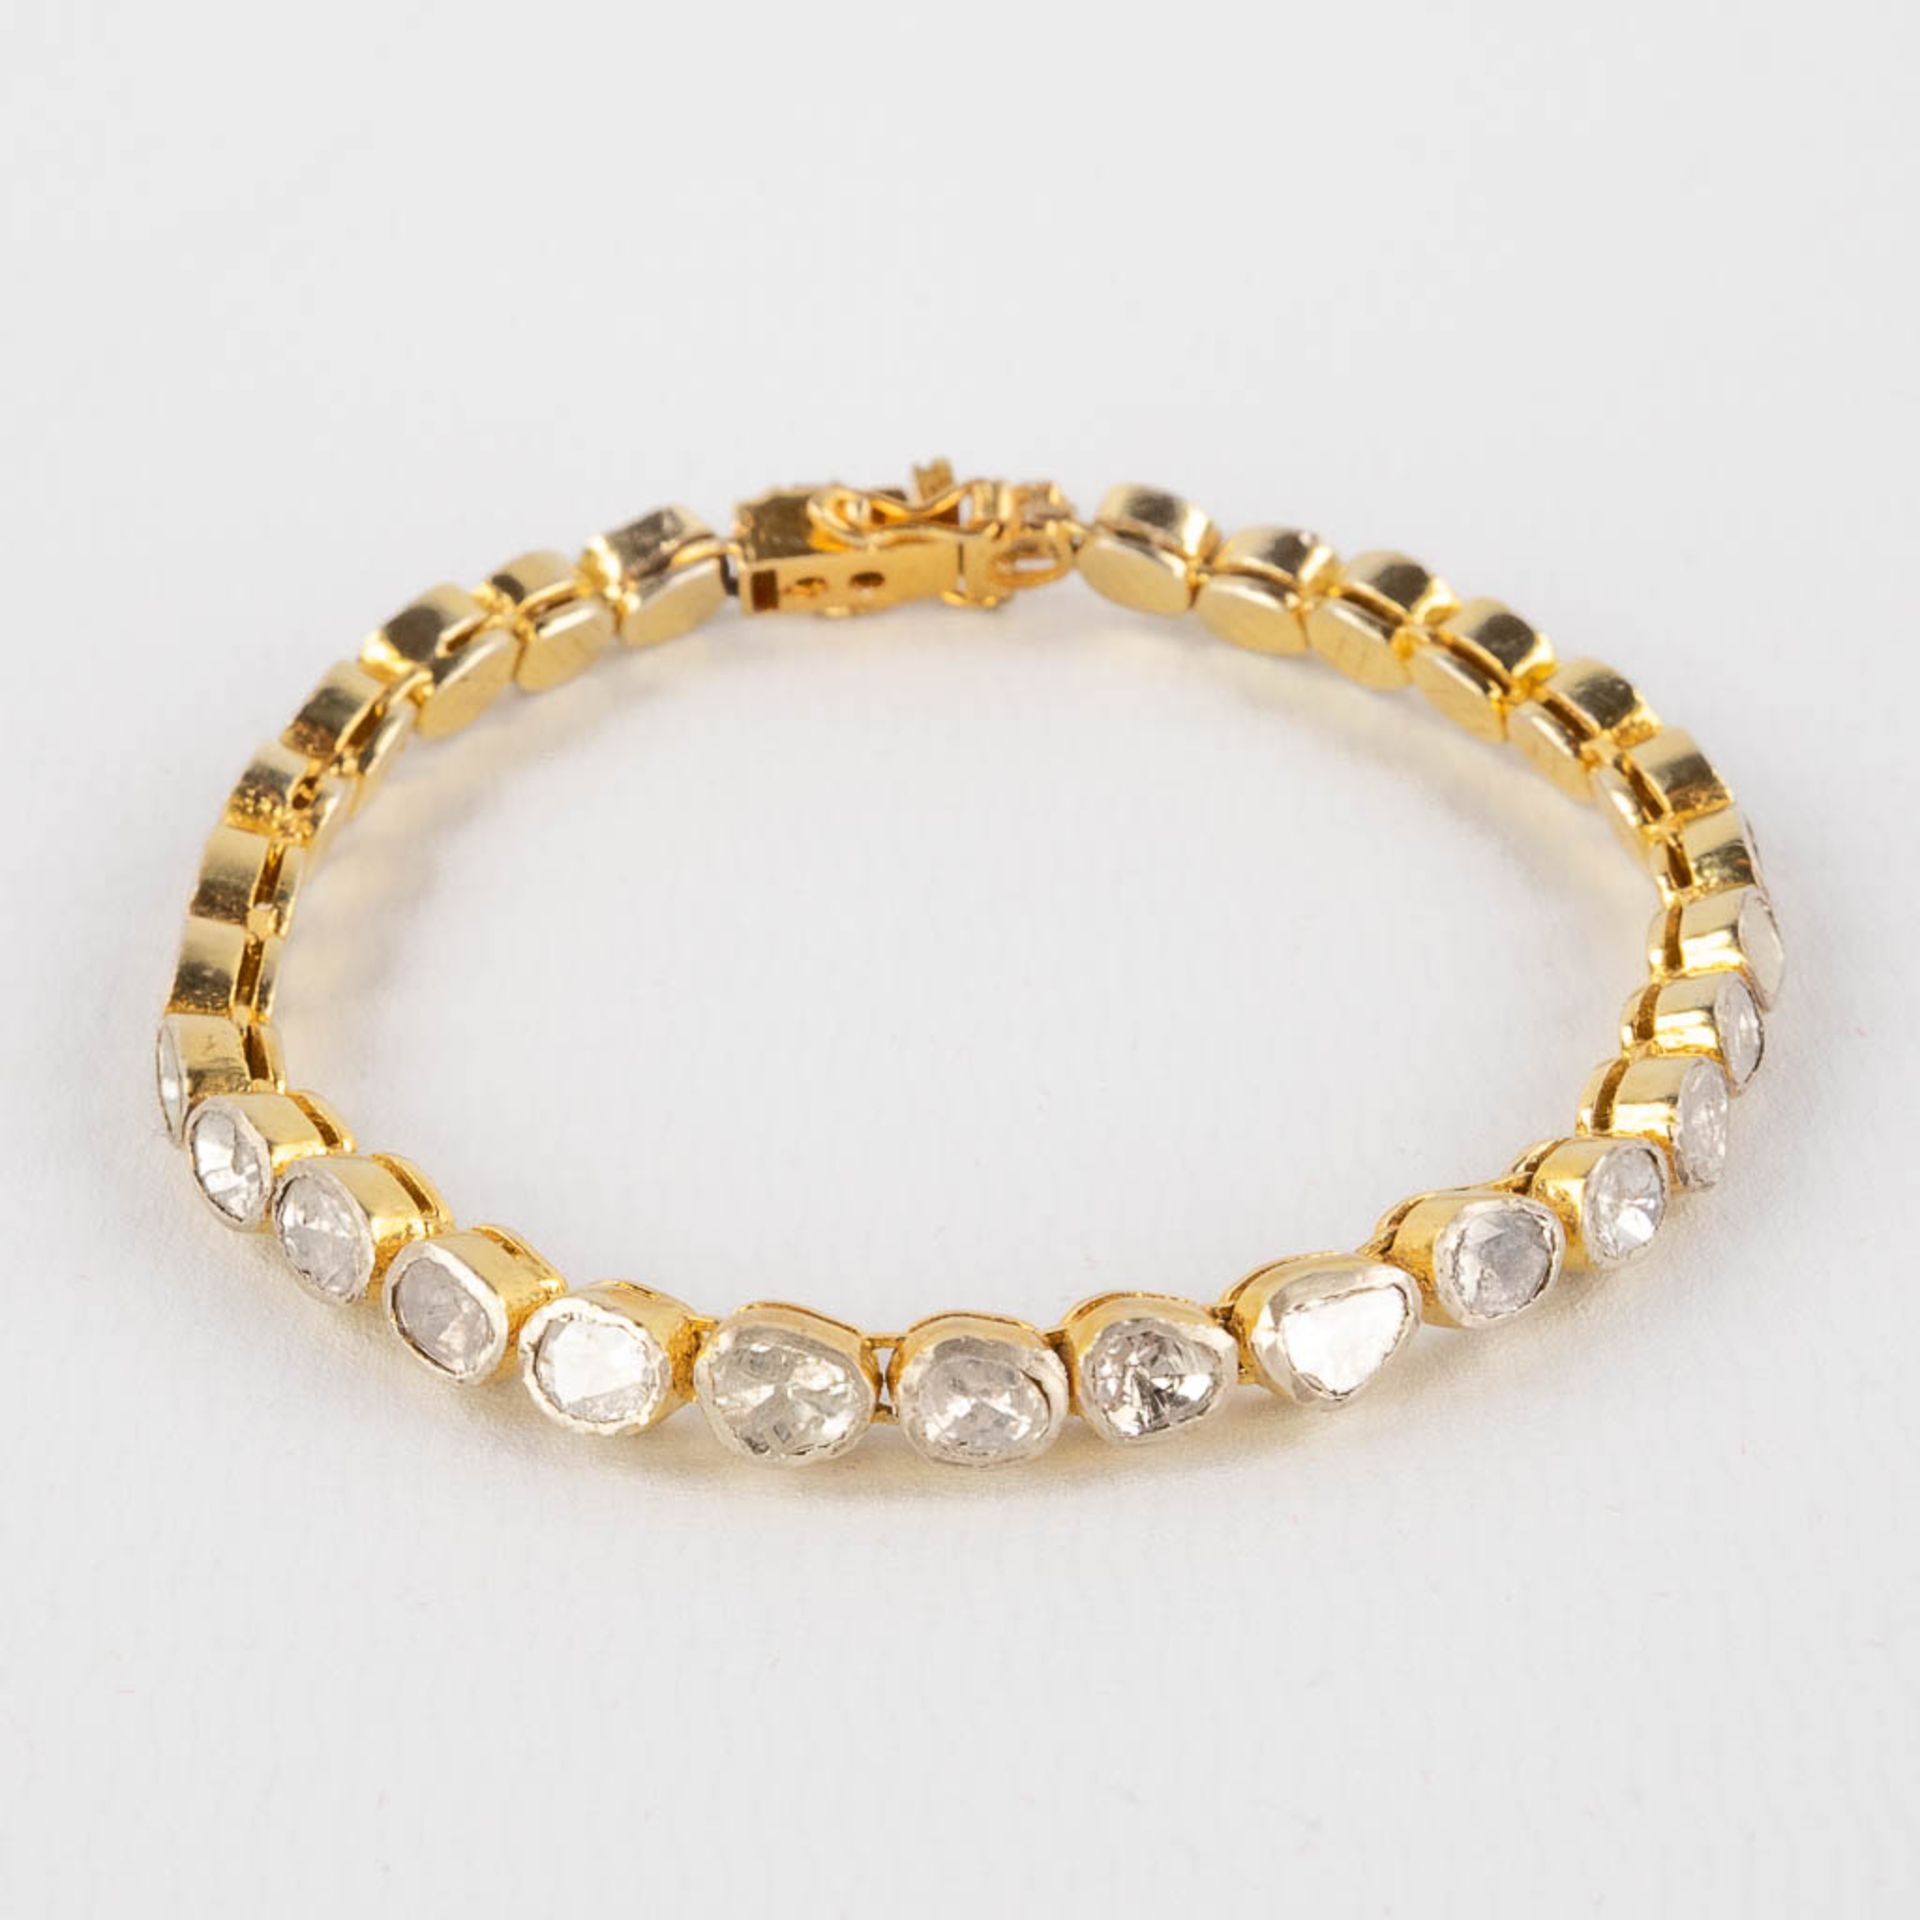 A bracelet with rough cut and flat top diamonds, in silver holders, gilt silver. 19,51g. (L:19,6 cm) - Image 6 of 12